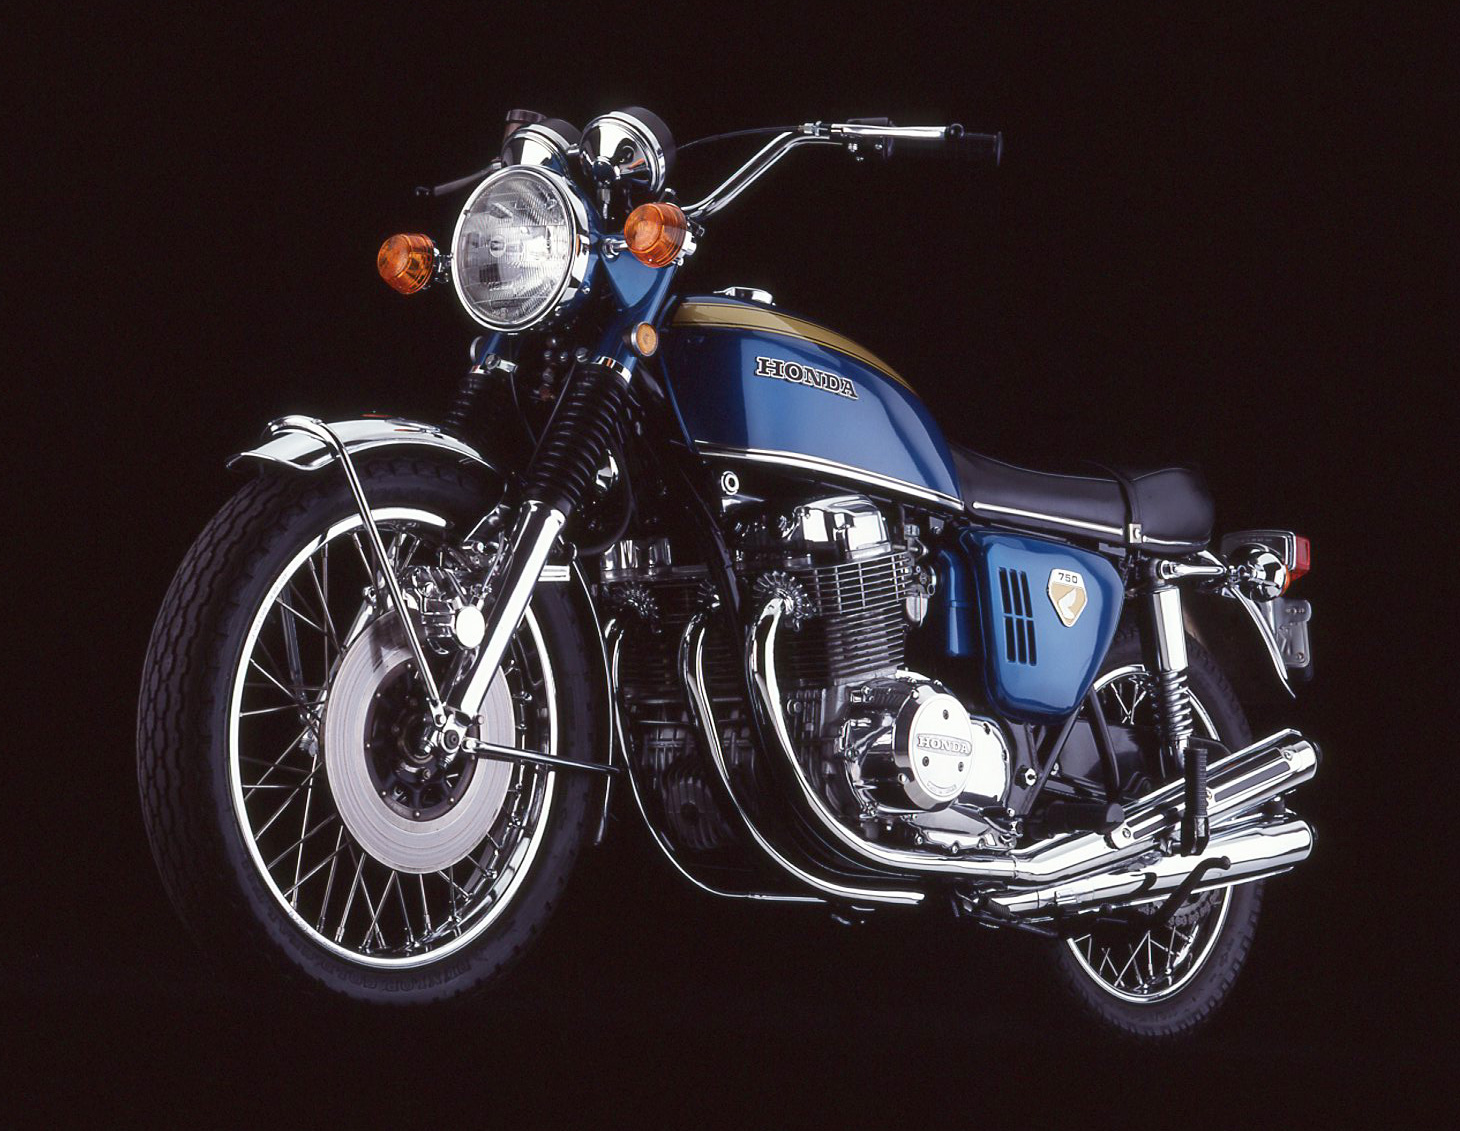 Pick of the Day 1971 Honda CB750 motorcycle that changed everything